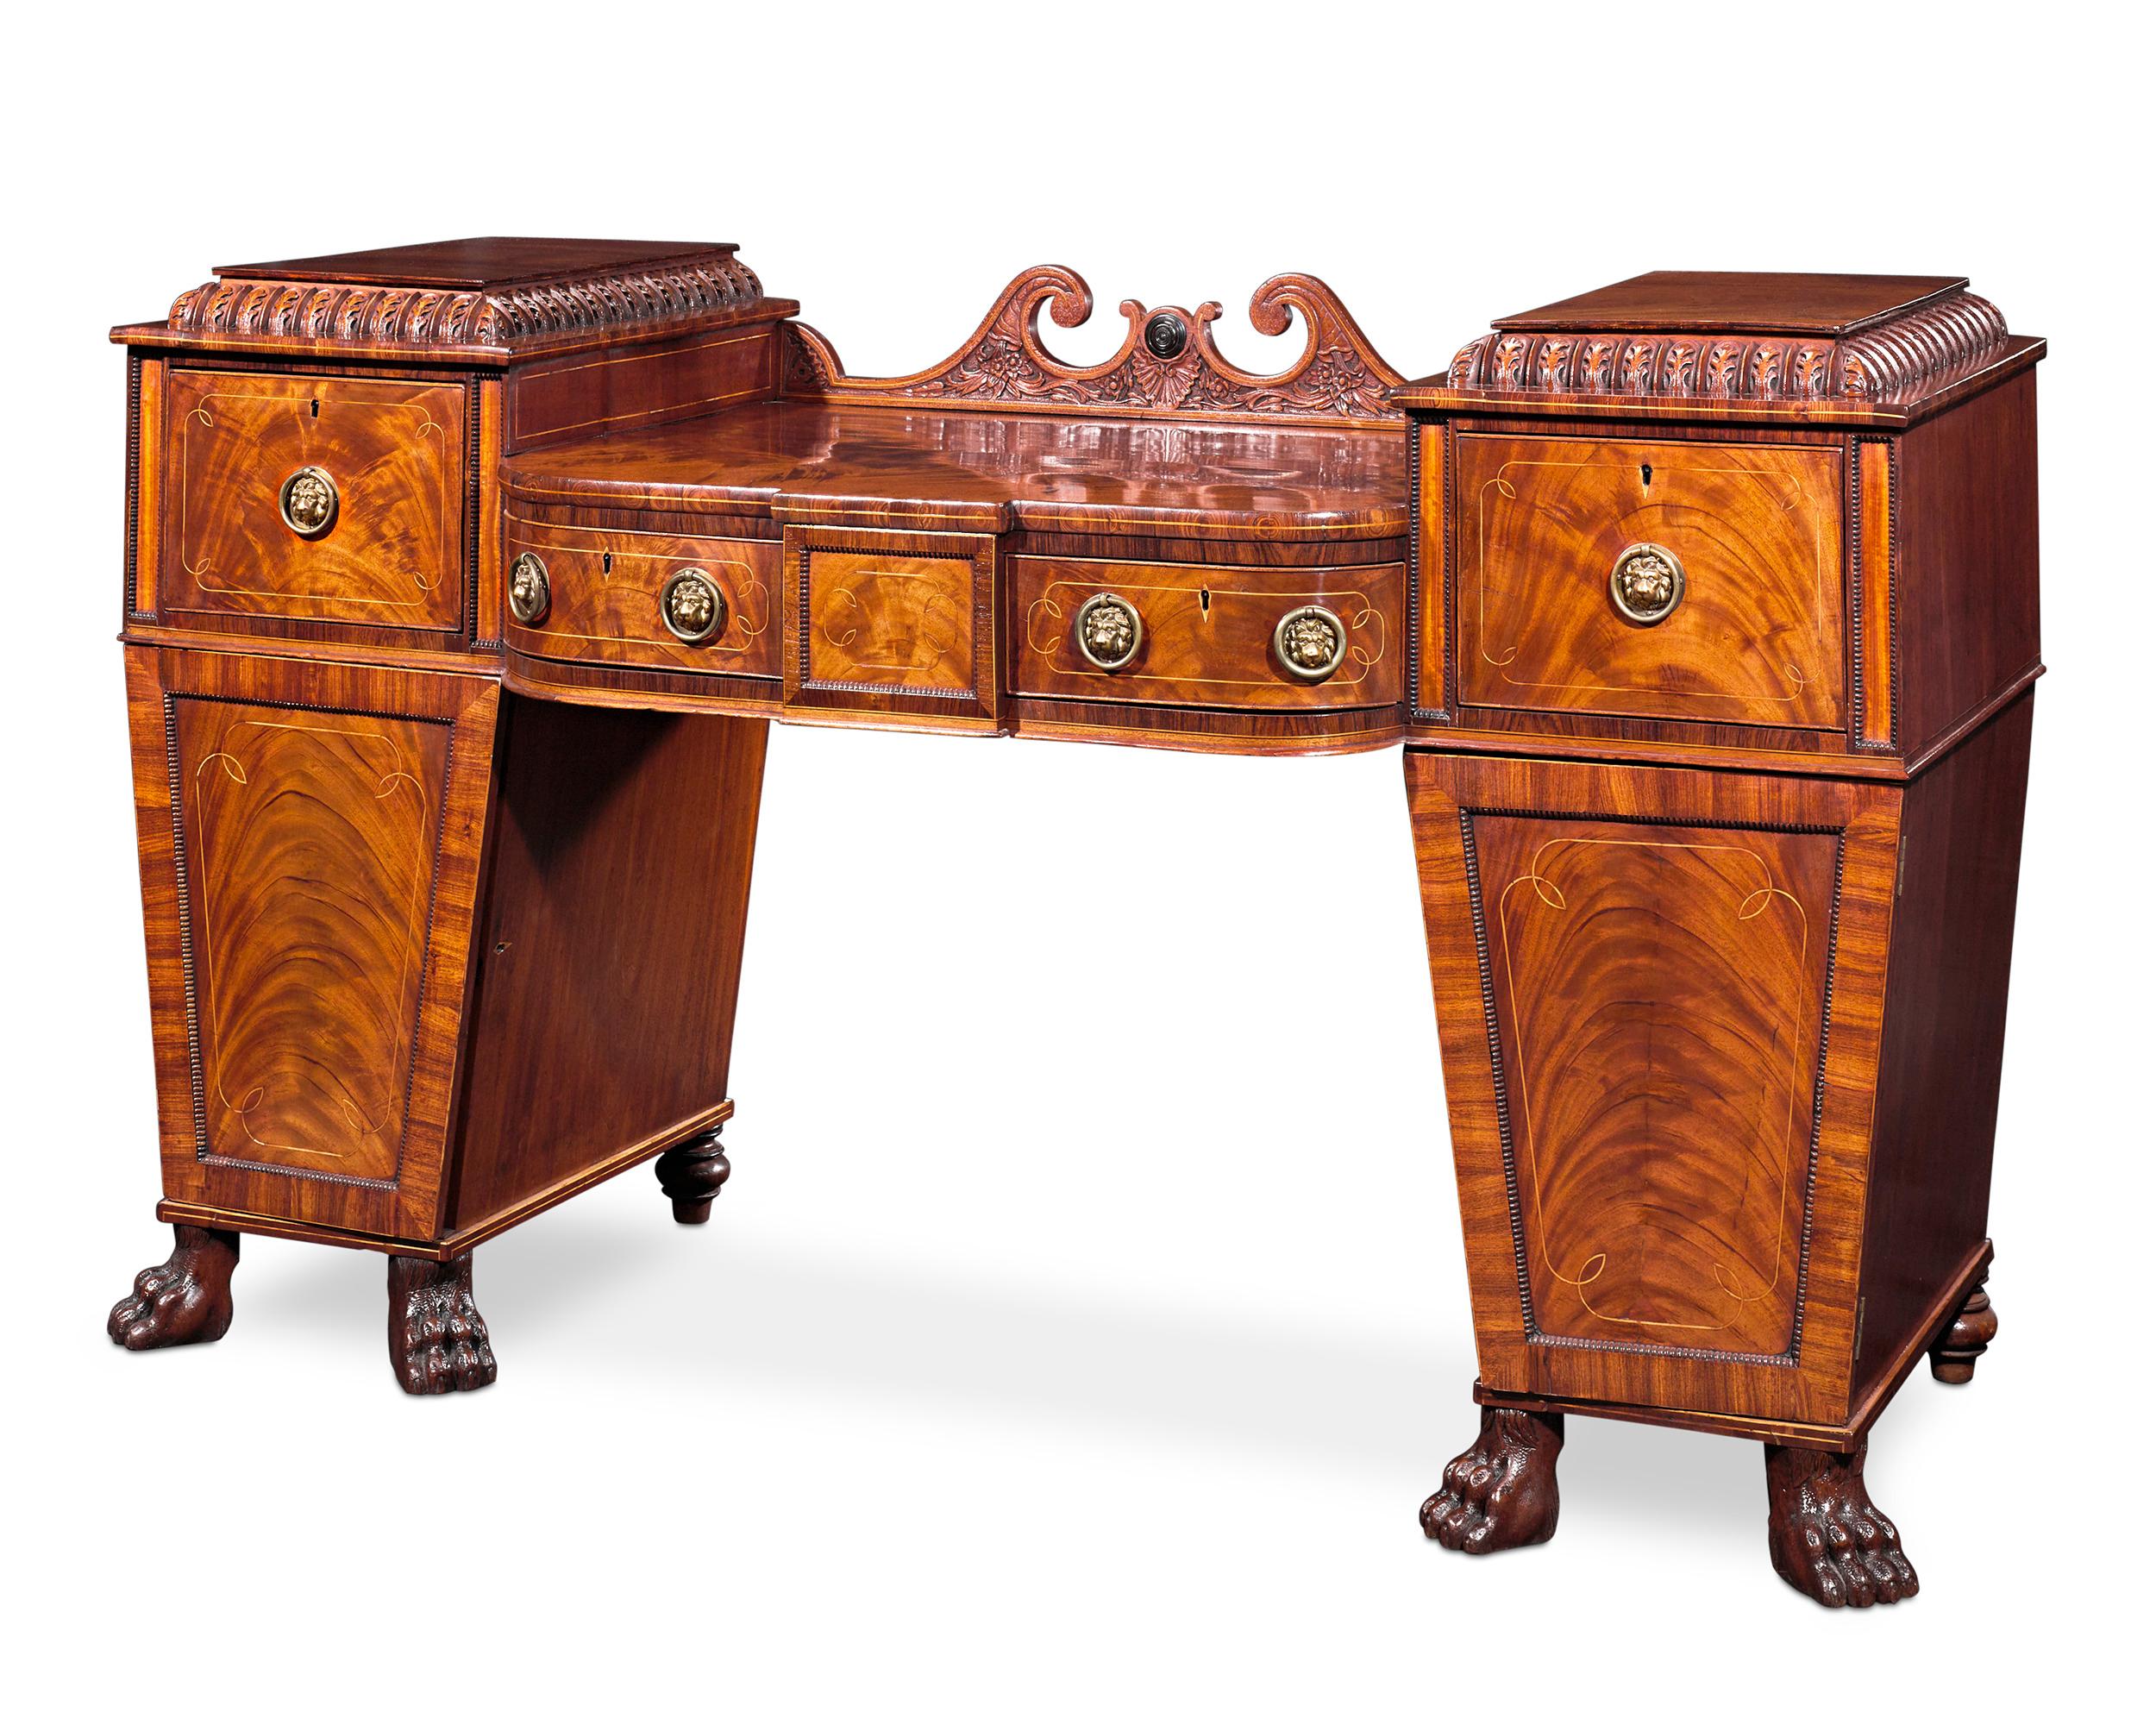 This monumental English mahogany sideboard captures the luxury of the Regency era in grand style. Crafted in the neoclassical taste, the sideboard evokes the stately forms of ancient Greek and Roman architecture in its beautifully proportioned form